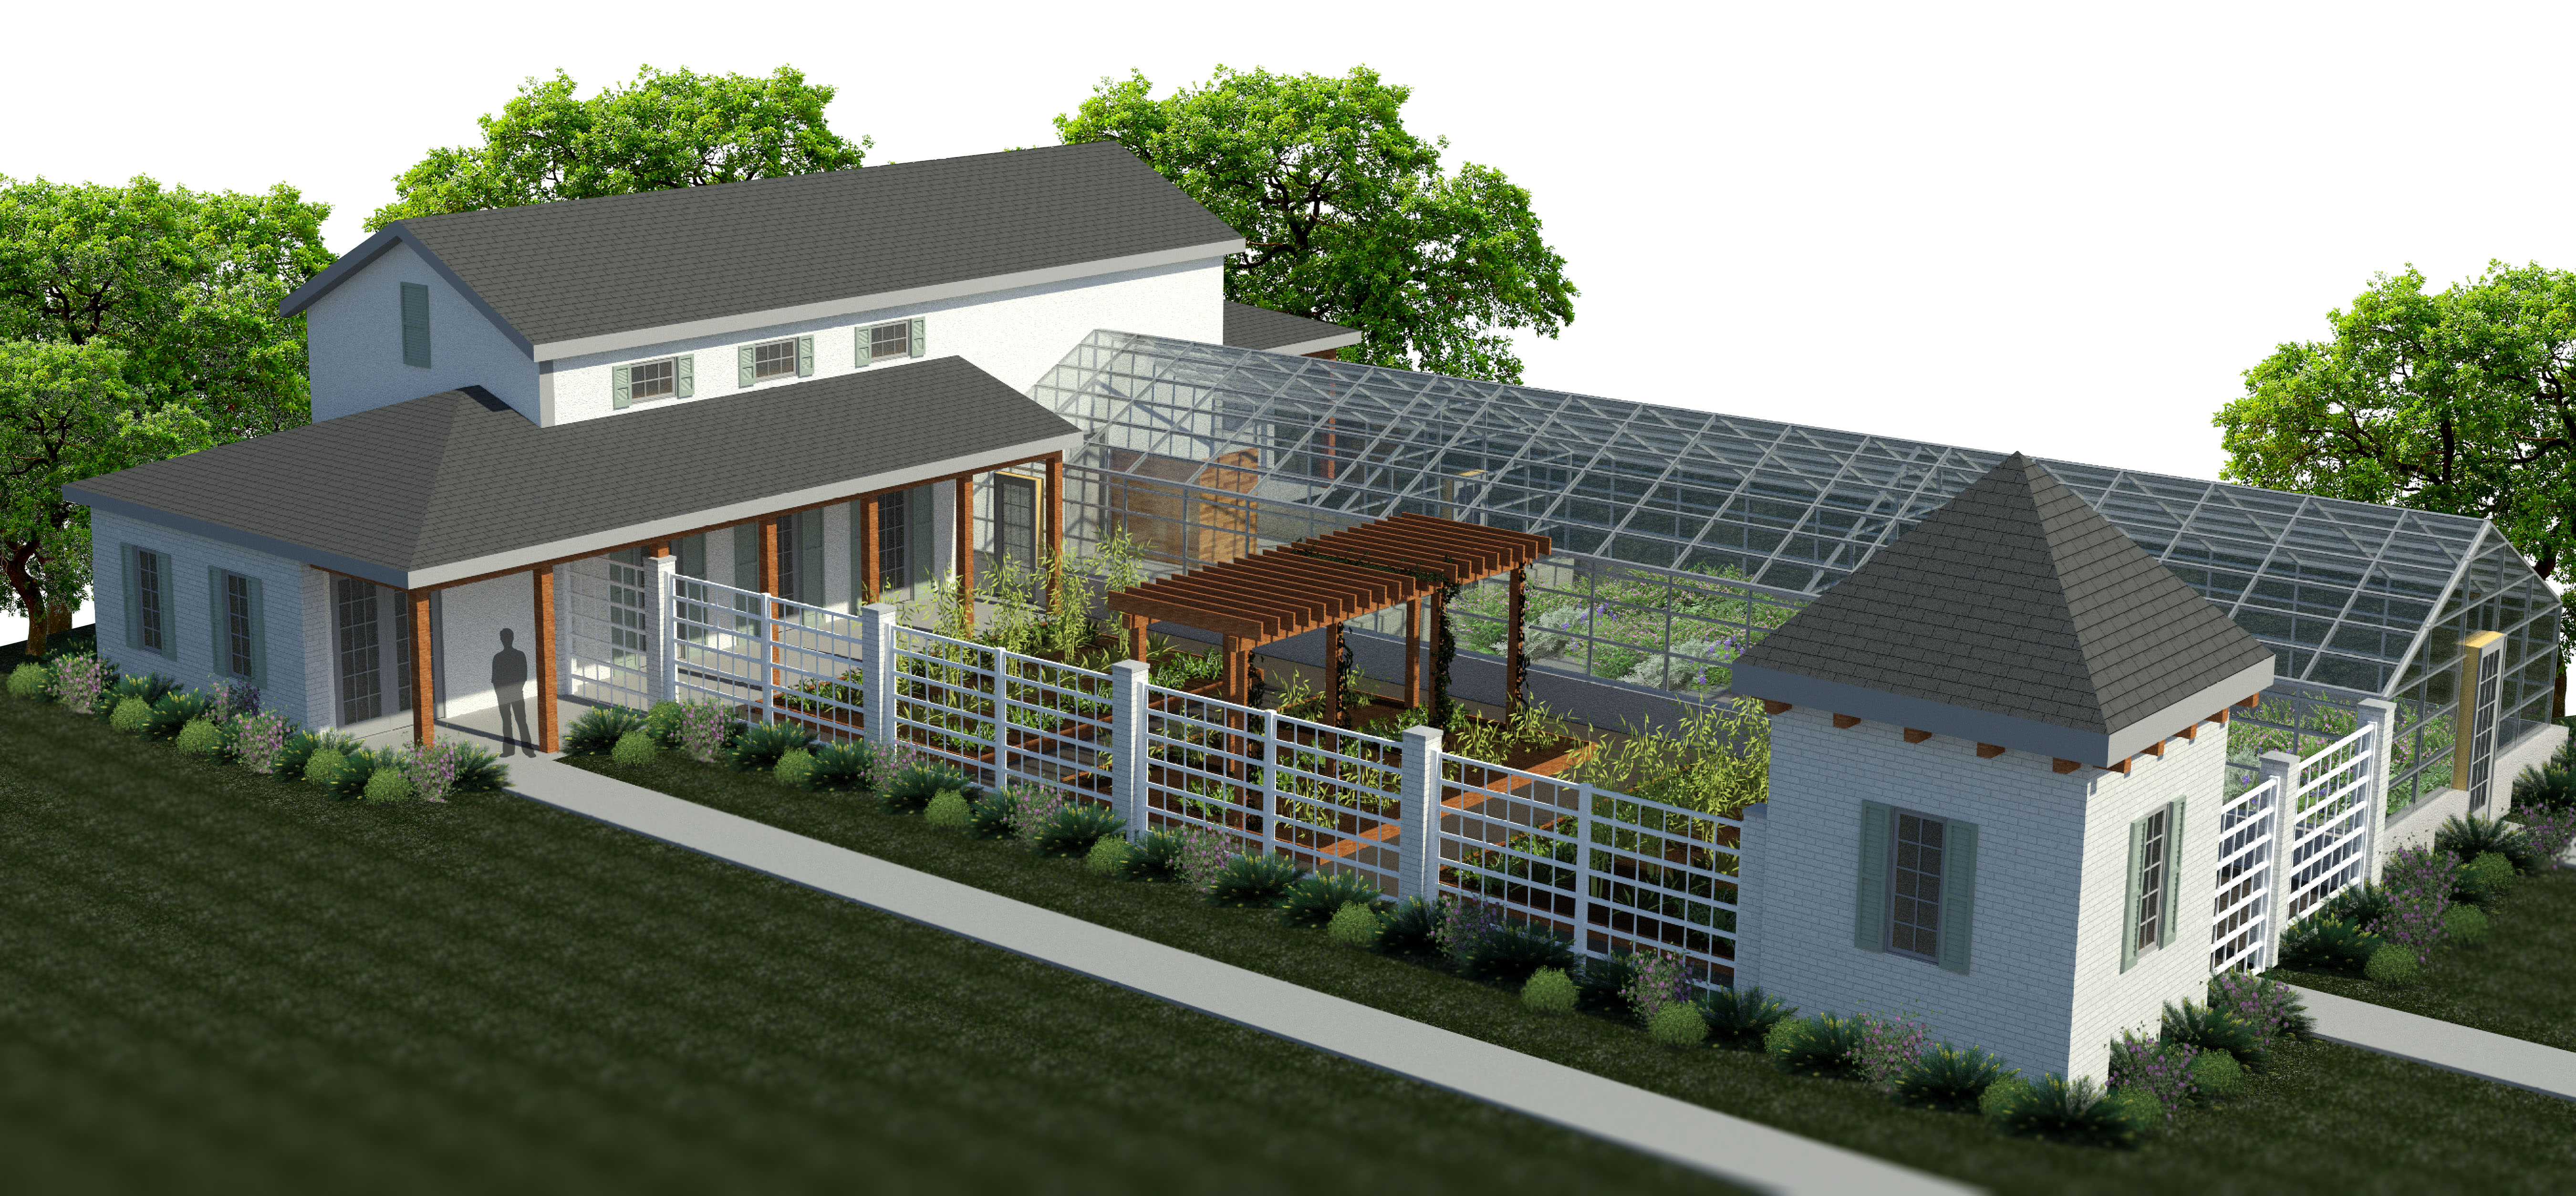 Nicholls Approves Plans for Greenhouse Renovation Project